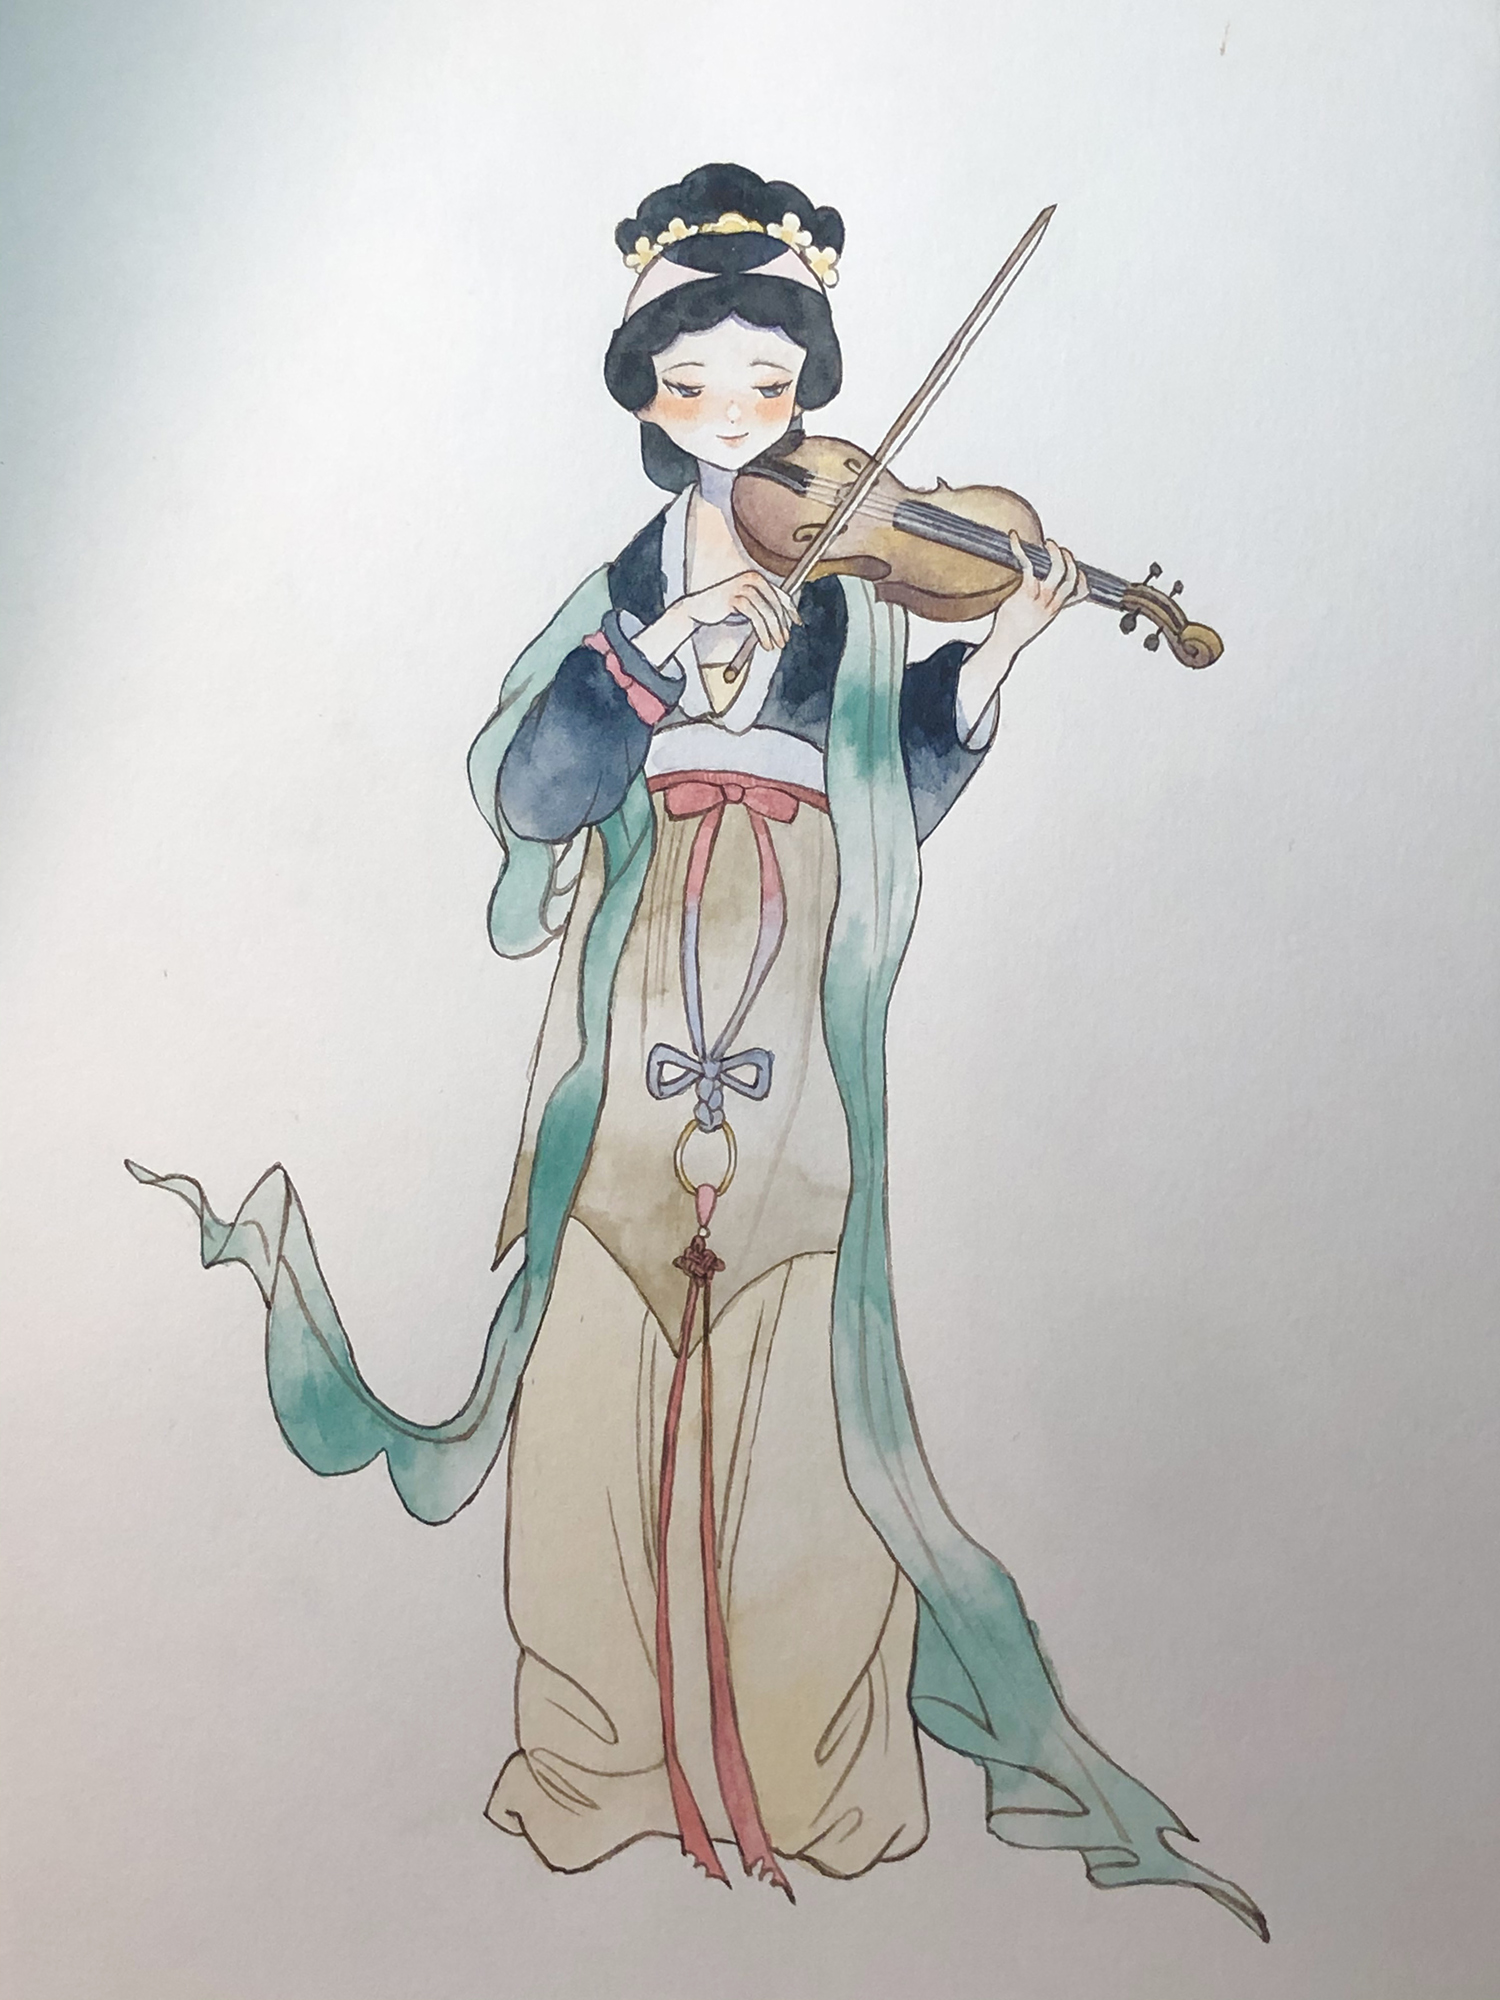 Japanese cartoon style illustration of a lady playing a violin